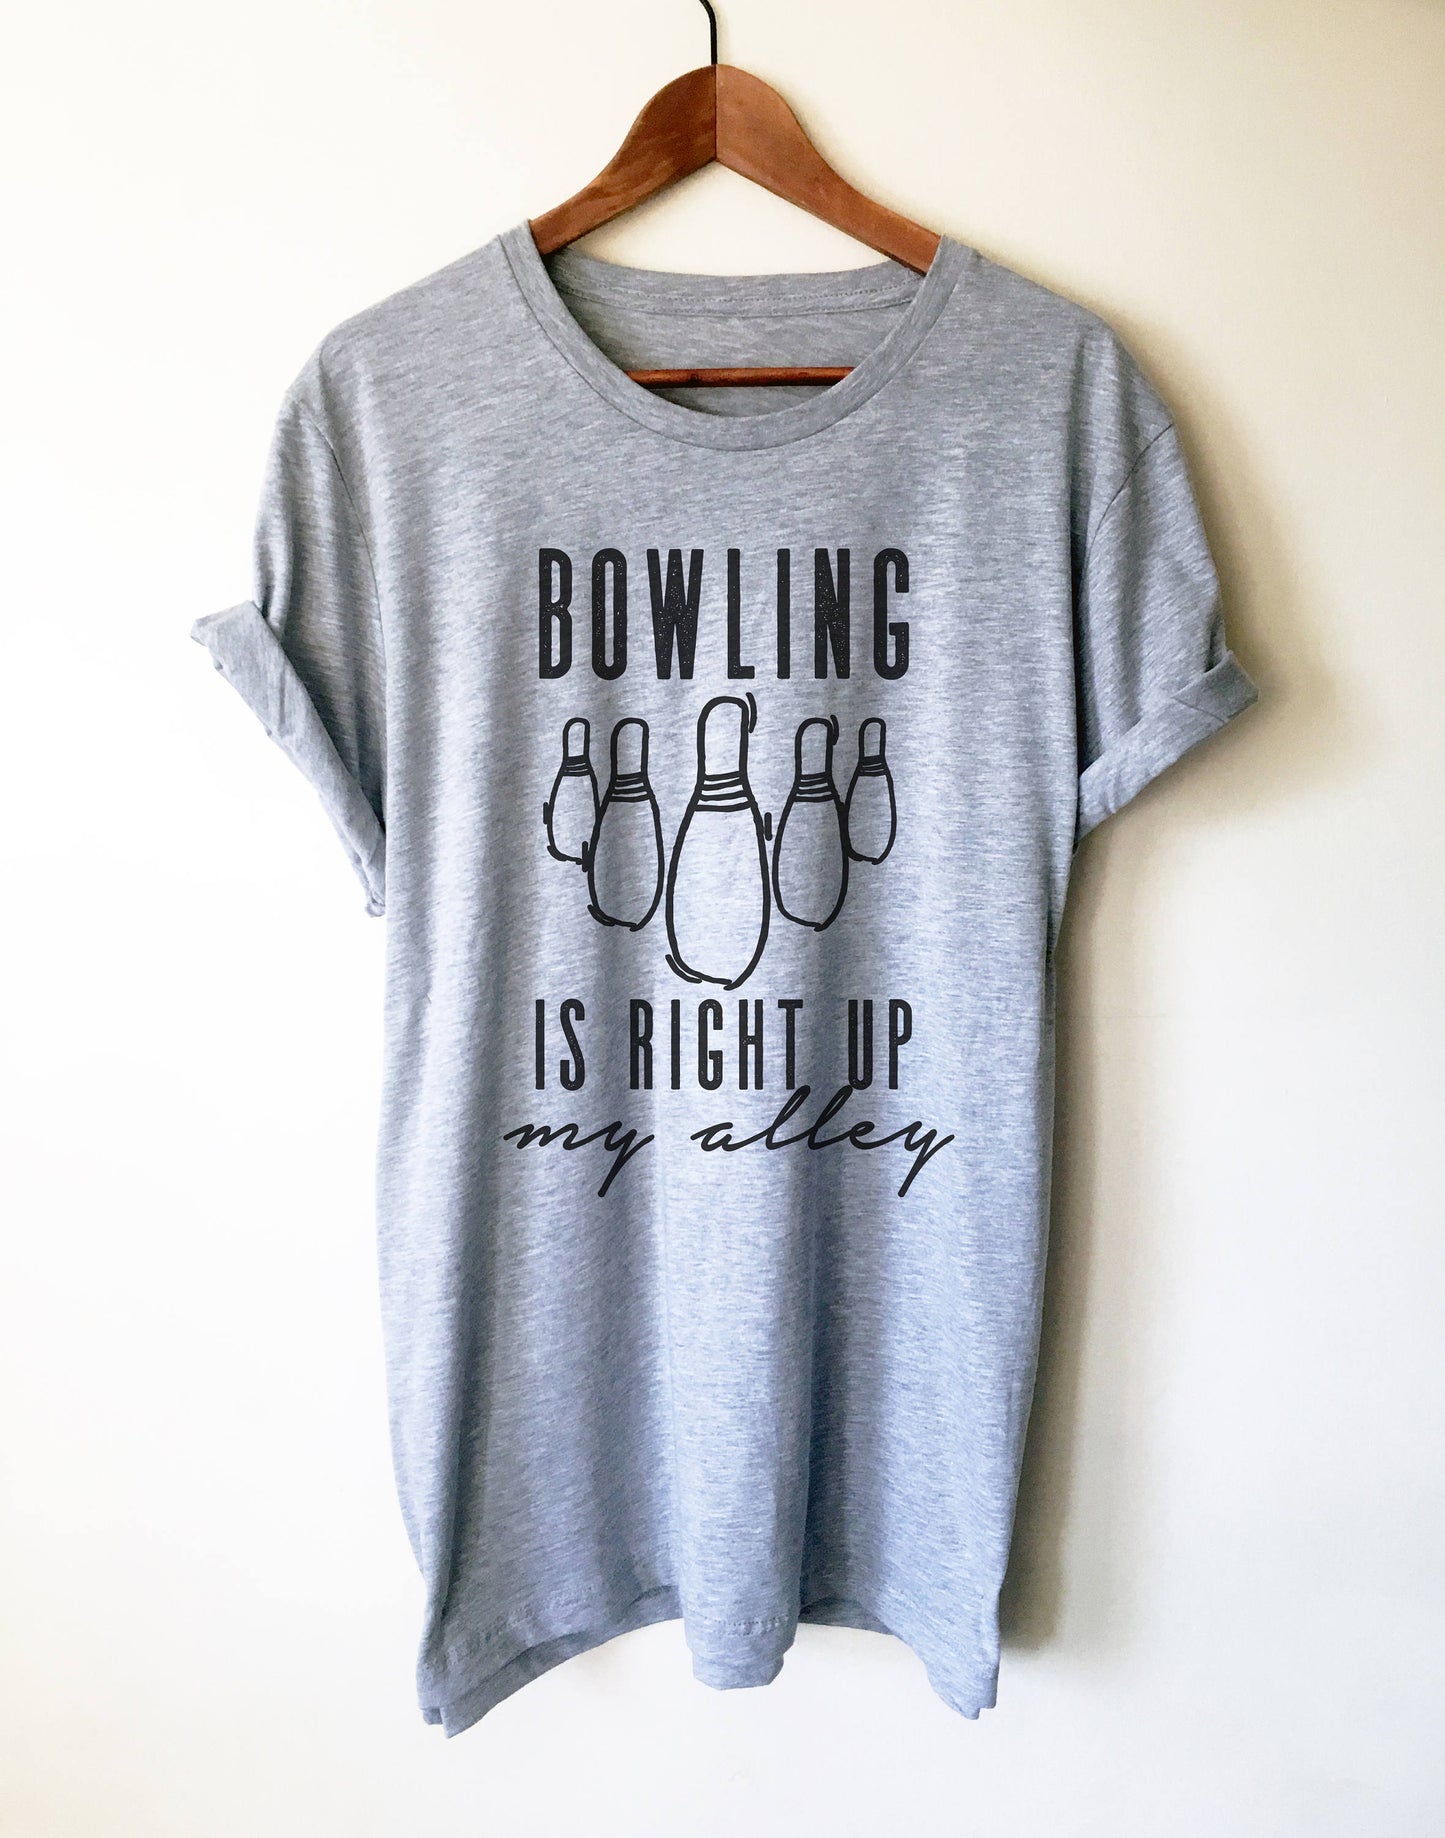 Bowling Is Right Up My Alley Unisex Shirt - Bowling Shirts, Bowling Gifts,  Bowling Party, Bowling Alley, Sports Shirt, Ten Pin Bowling Gift